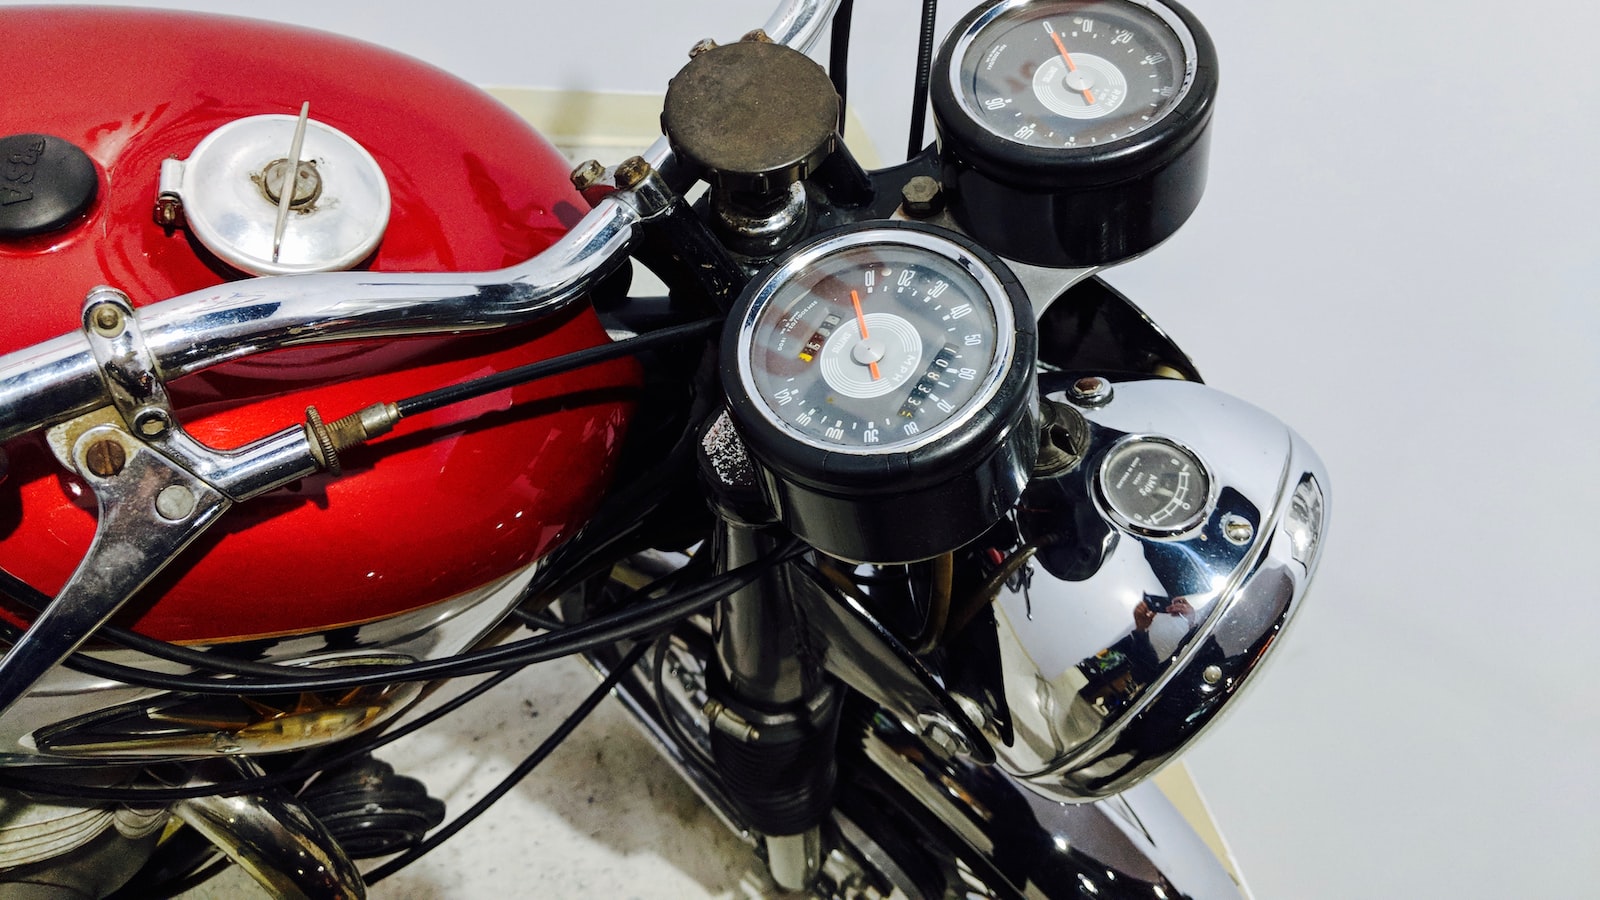 Taking Safety to the Next Level: Innovative Safety Measures in High-End Motorcycles